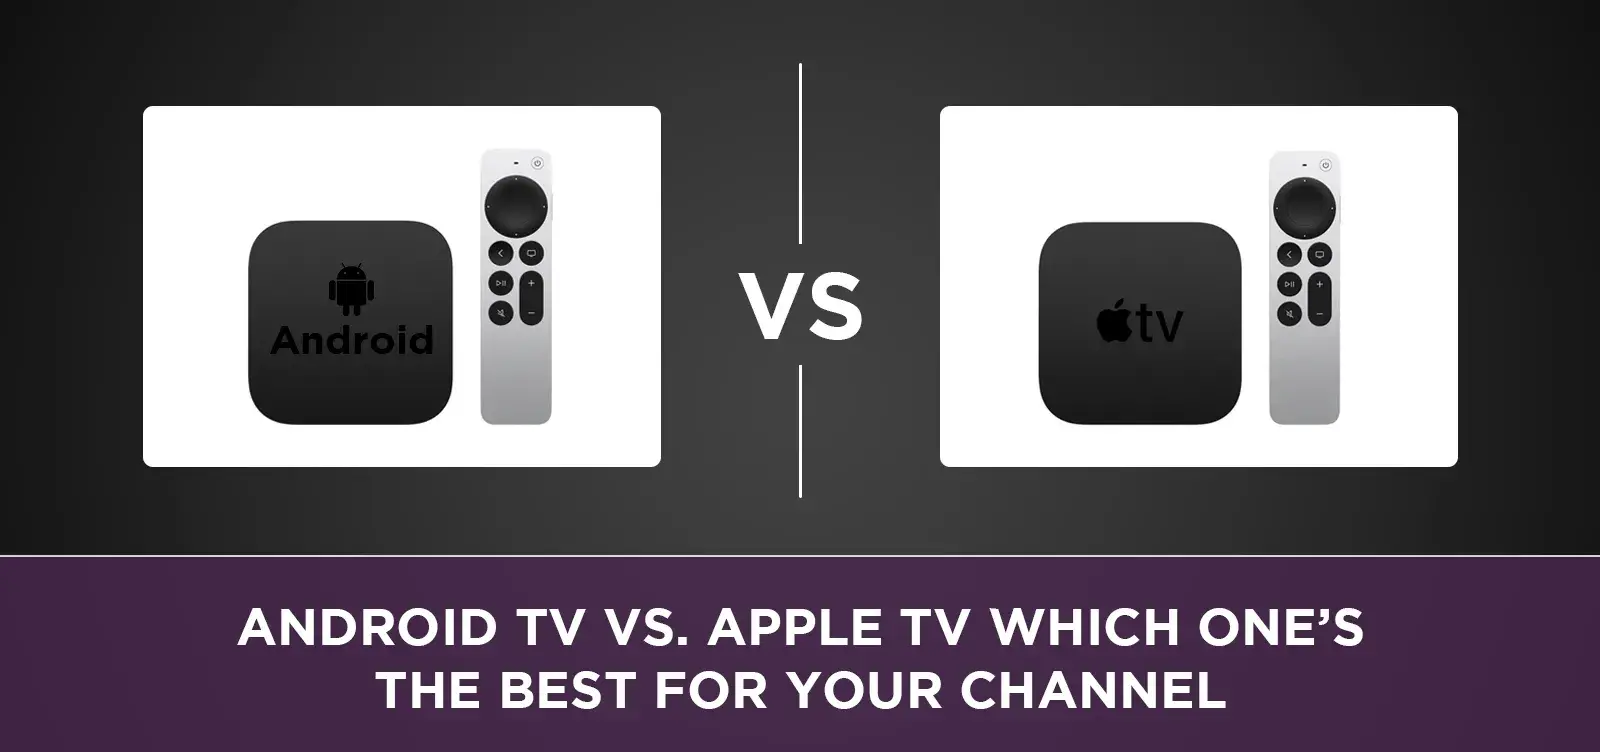 Android TV vs. Apple TV Which one the best for your channel